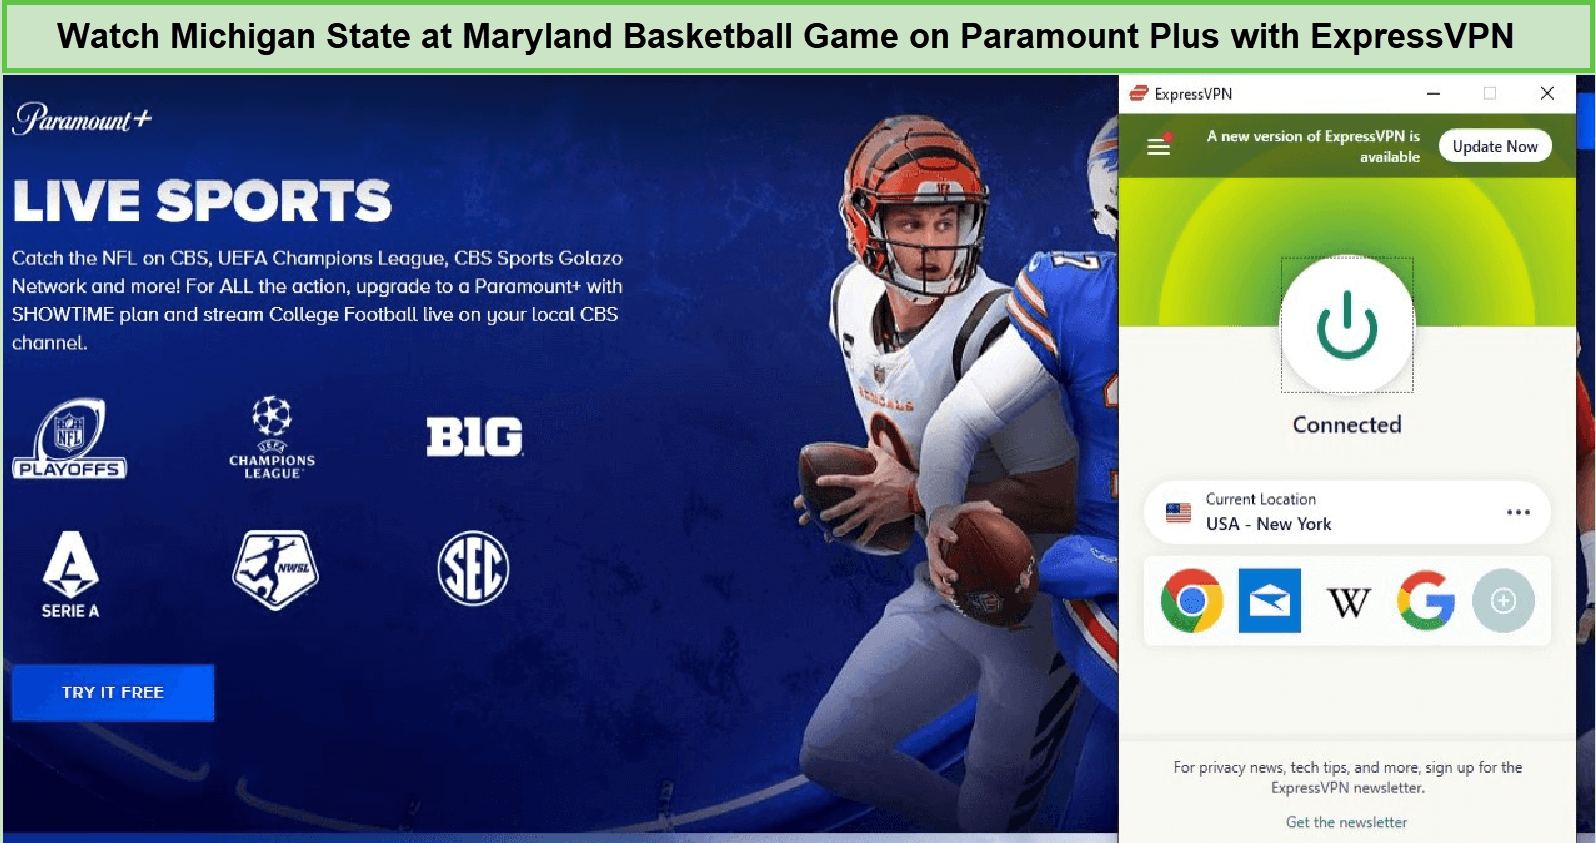 Watch-Michigan-State-at-Maryland-Basketball-Game-in-Japan-on-Paramount-Plus-with-ExpressVPN